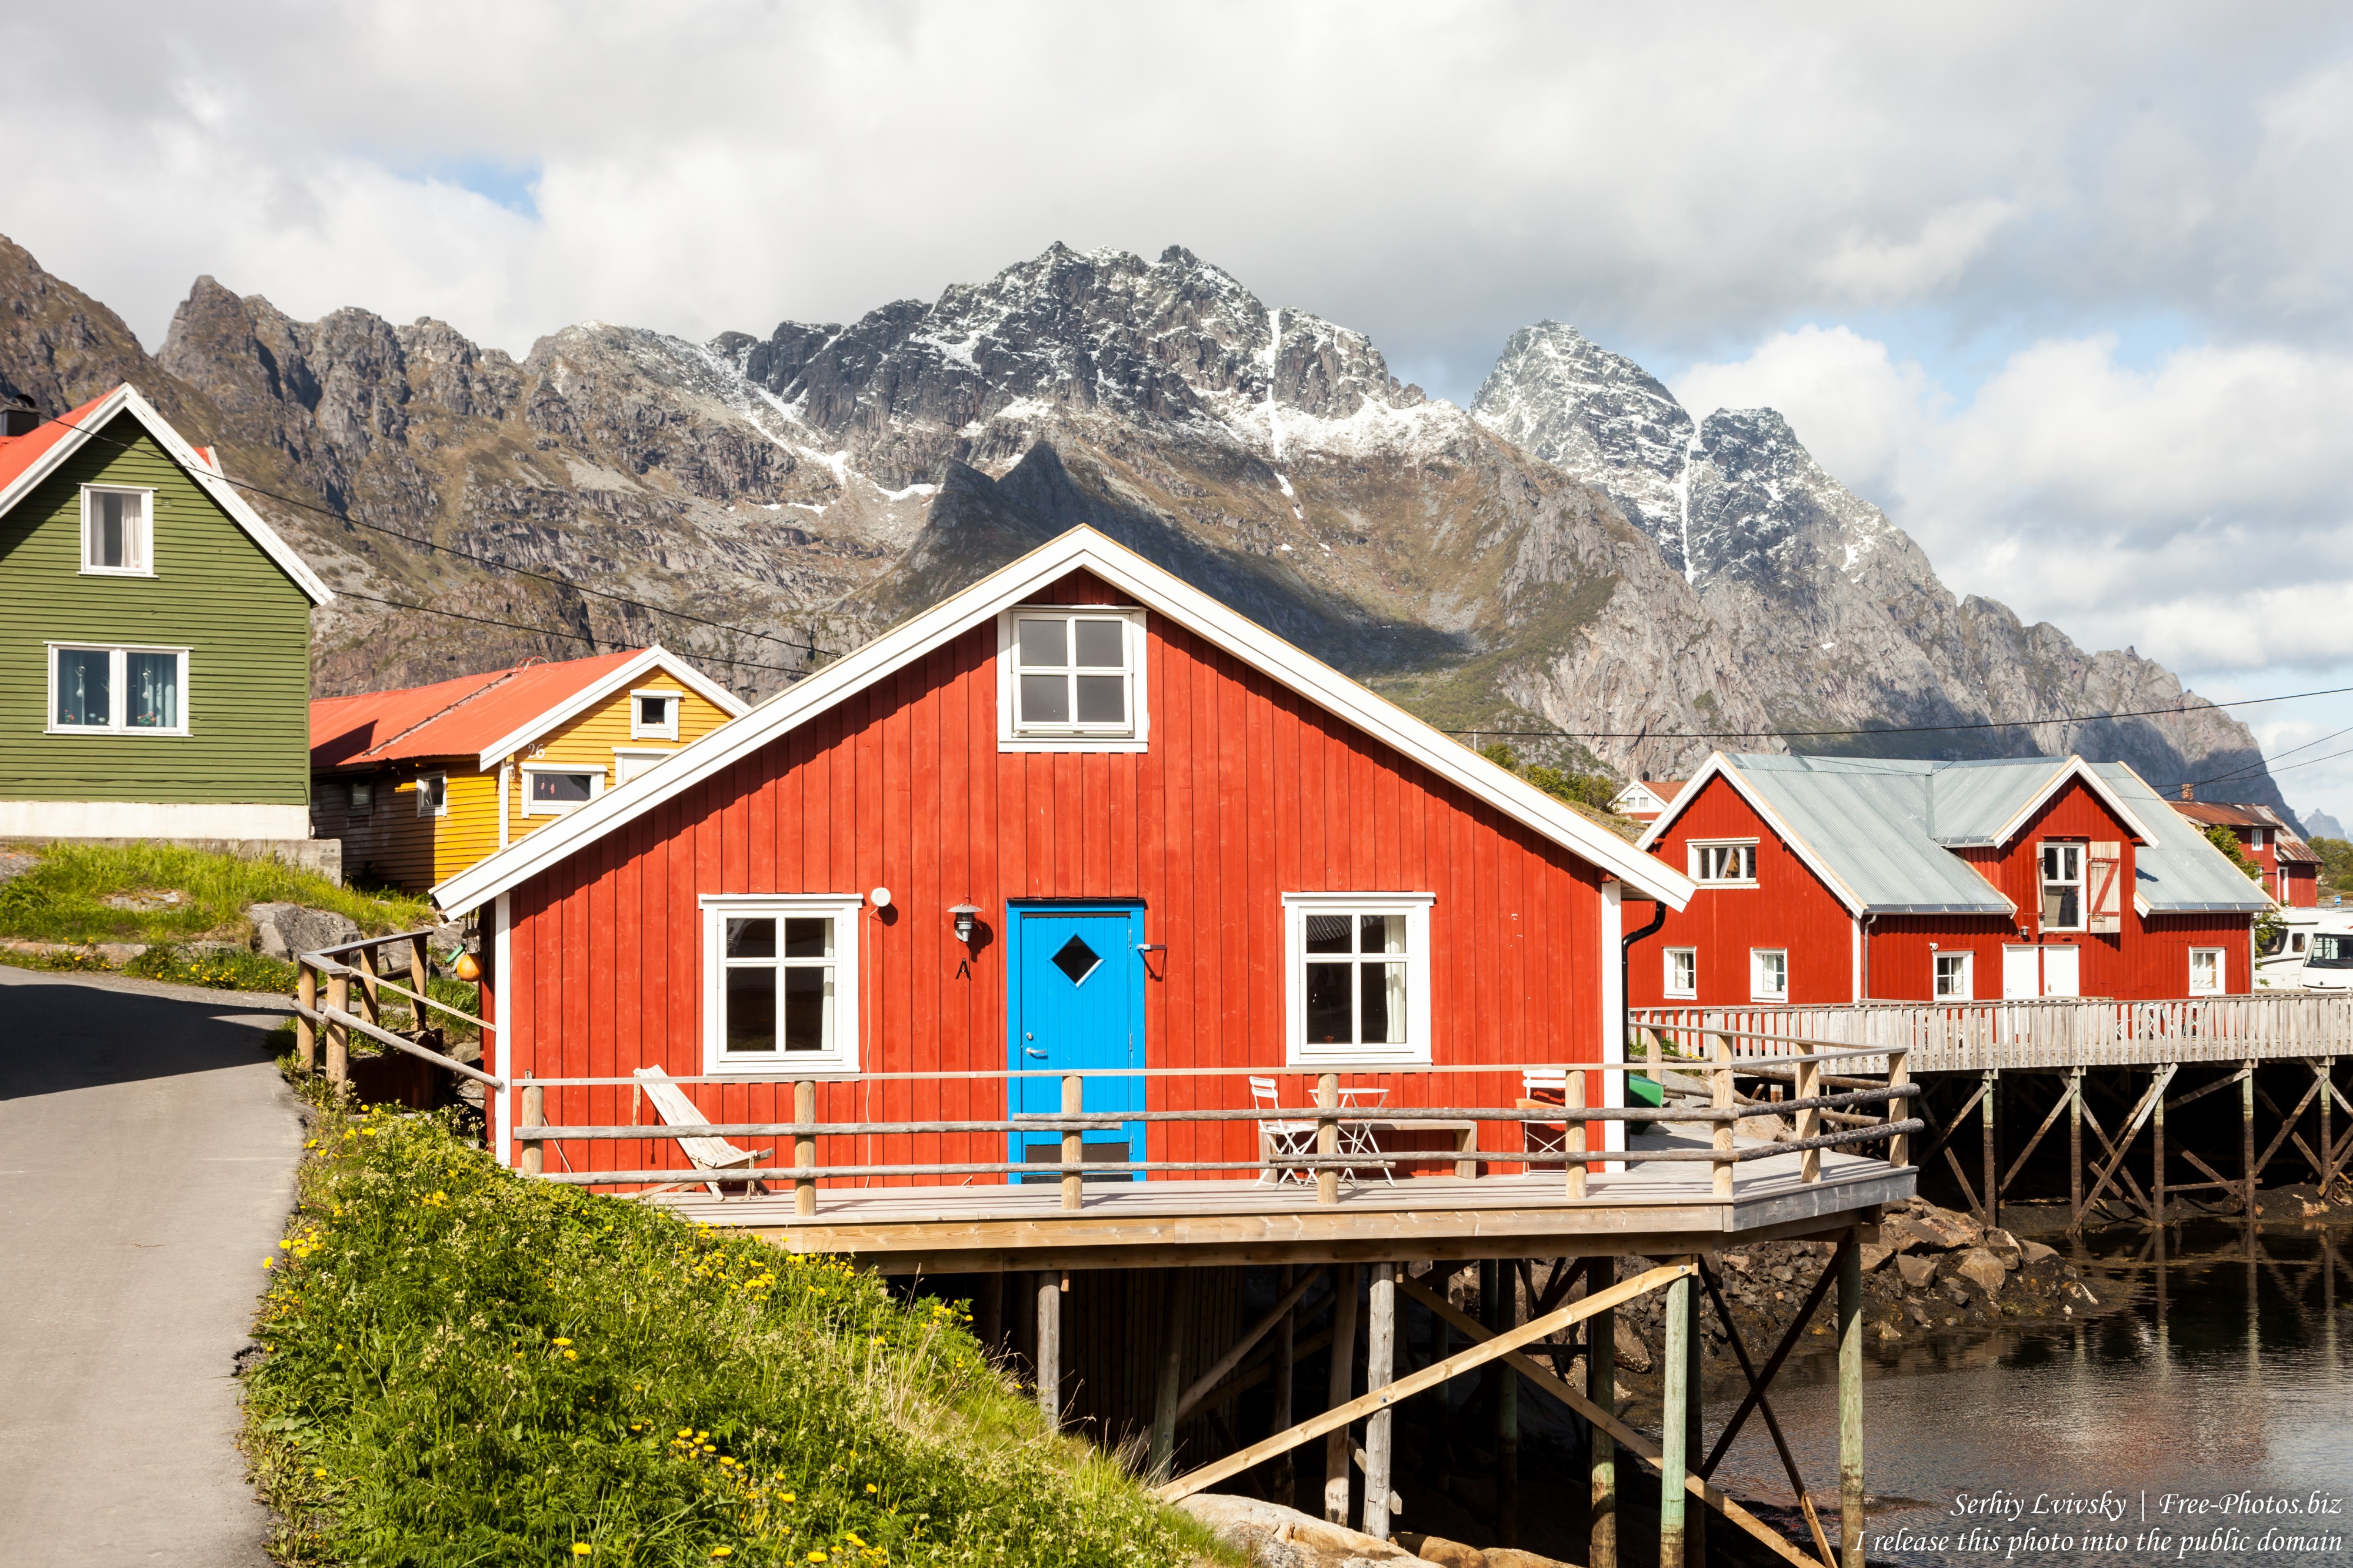 Lofoten, Norway photographed in June 2018 by Serhiy Lvivsky, picture 35